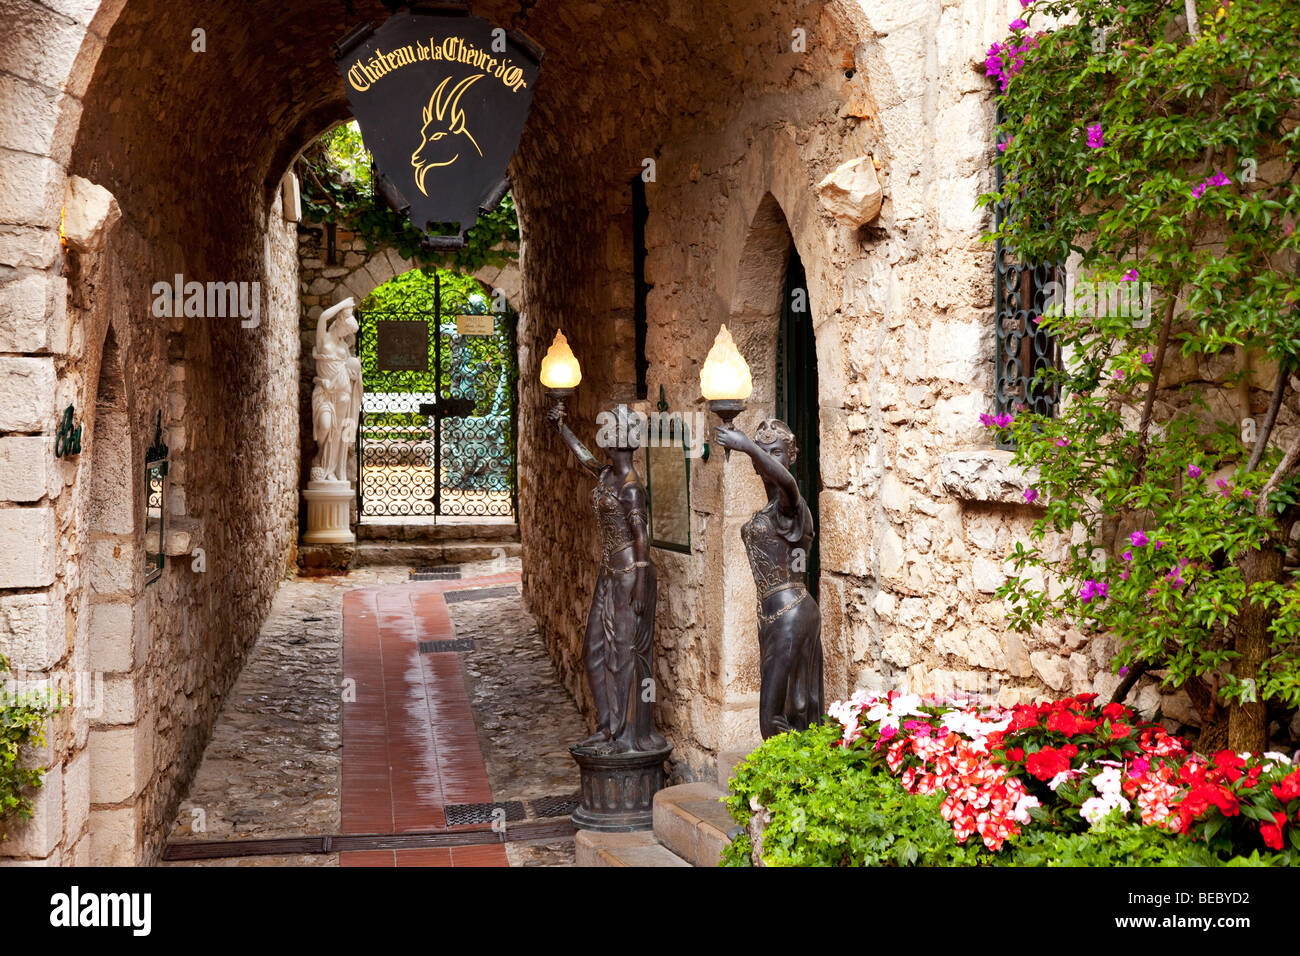 Restaurant and hotel entrance in Eze, Provence France Stock Photo